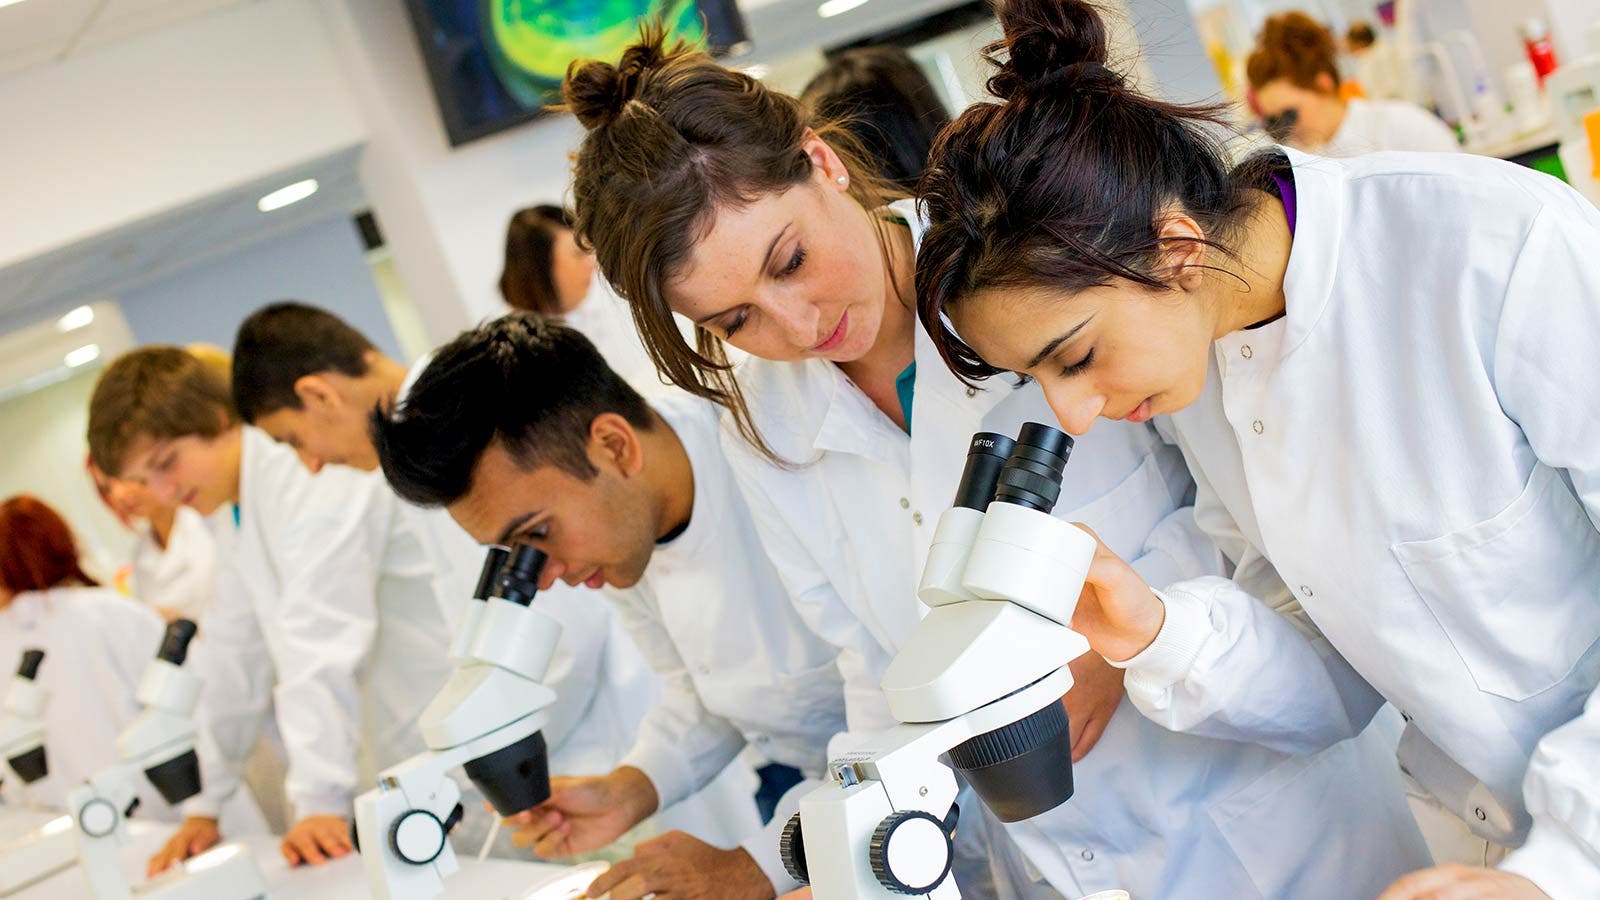 Science students in lab coats looking through microscopes